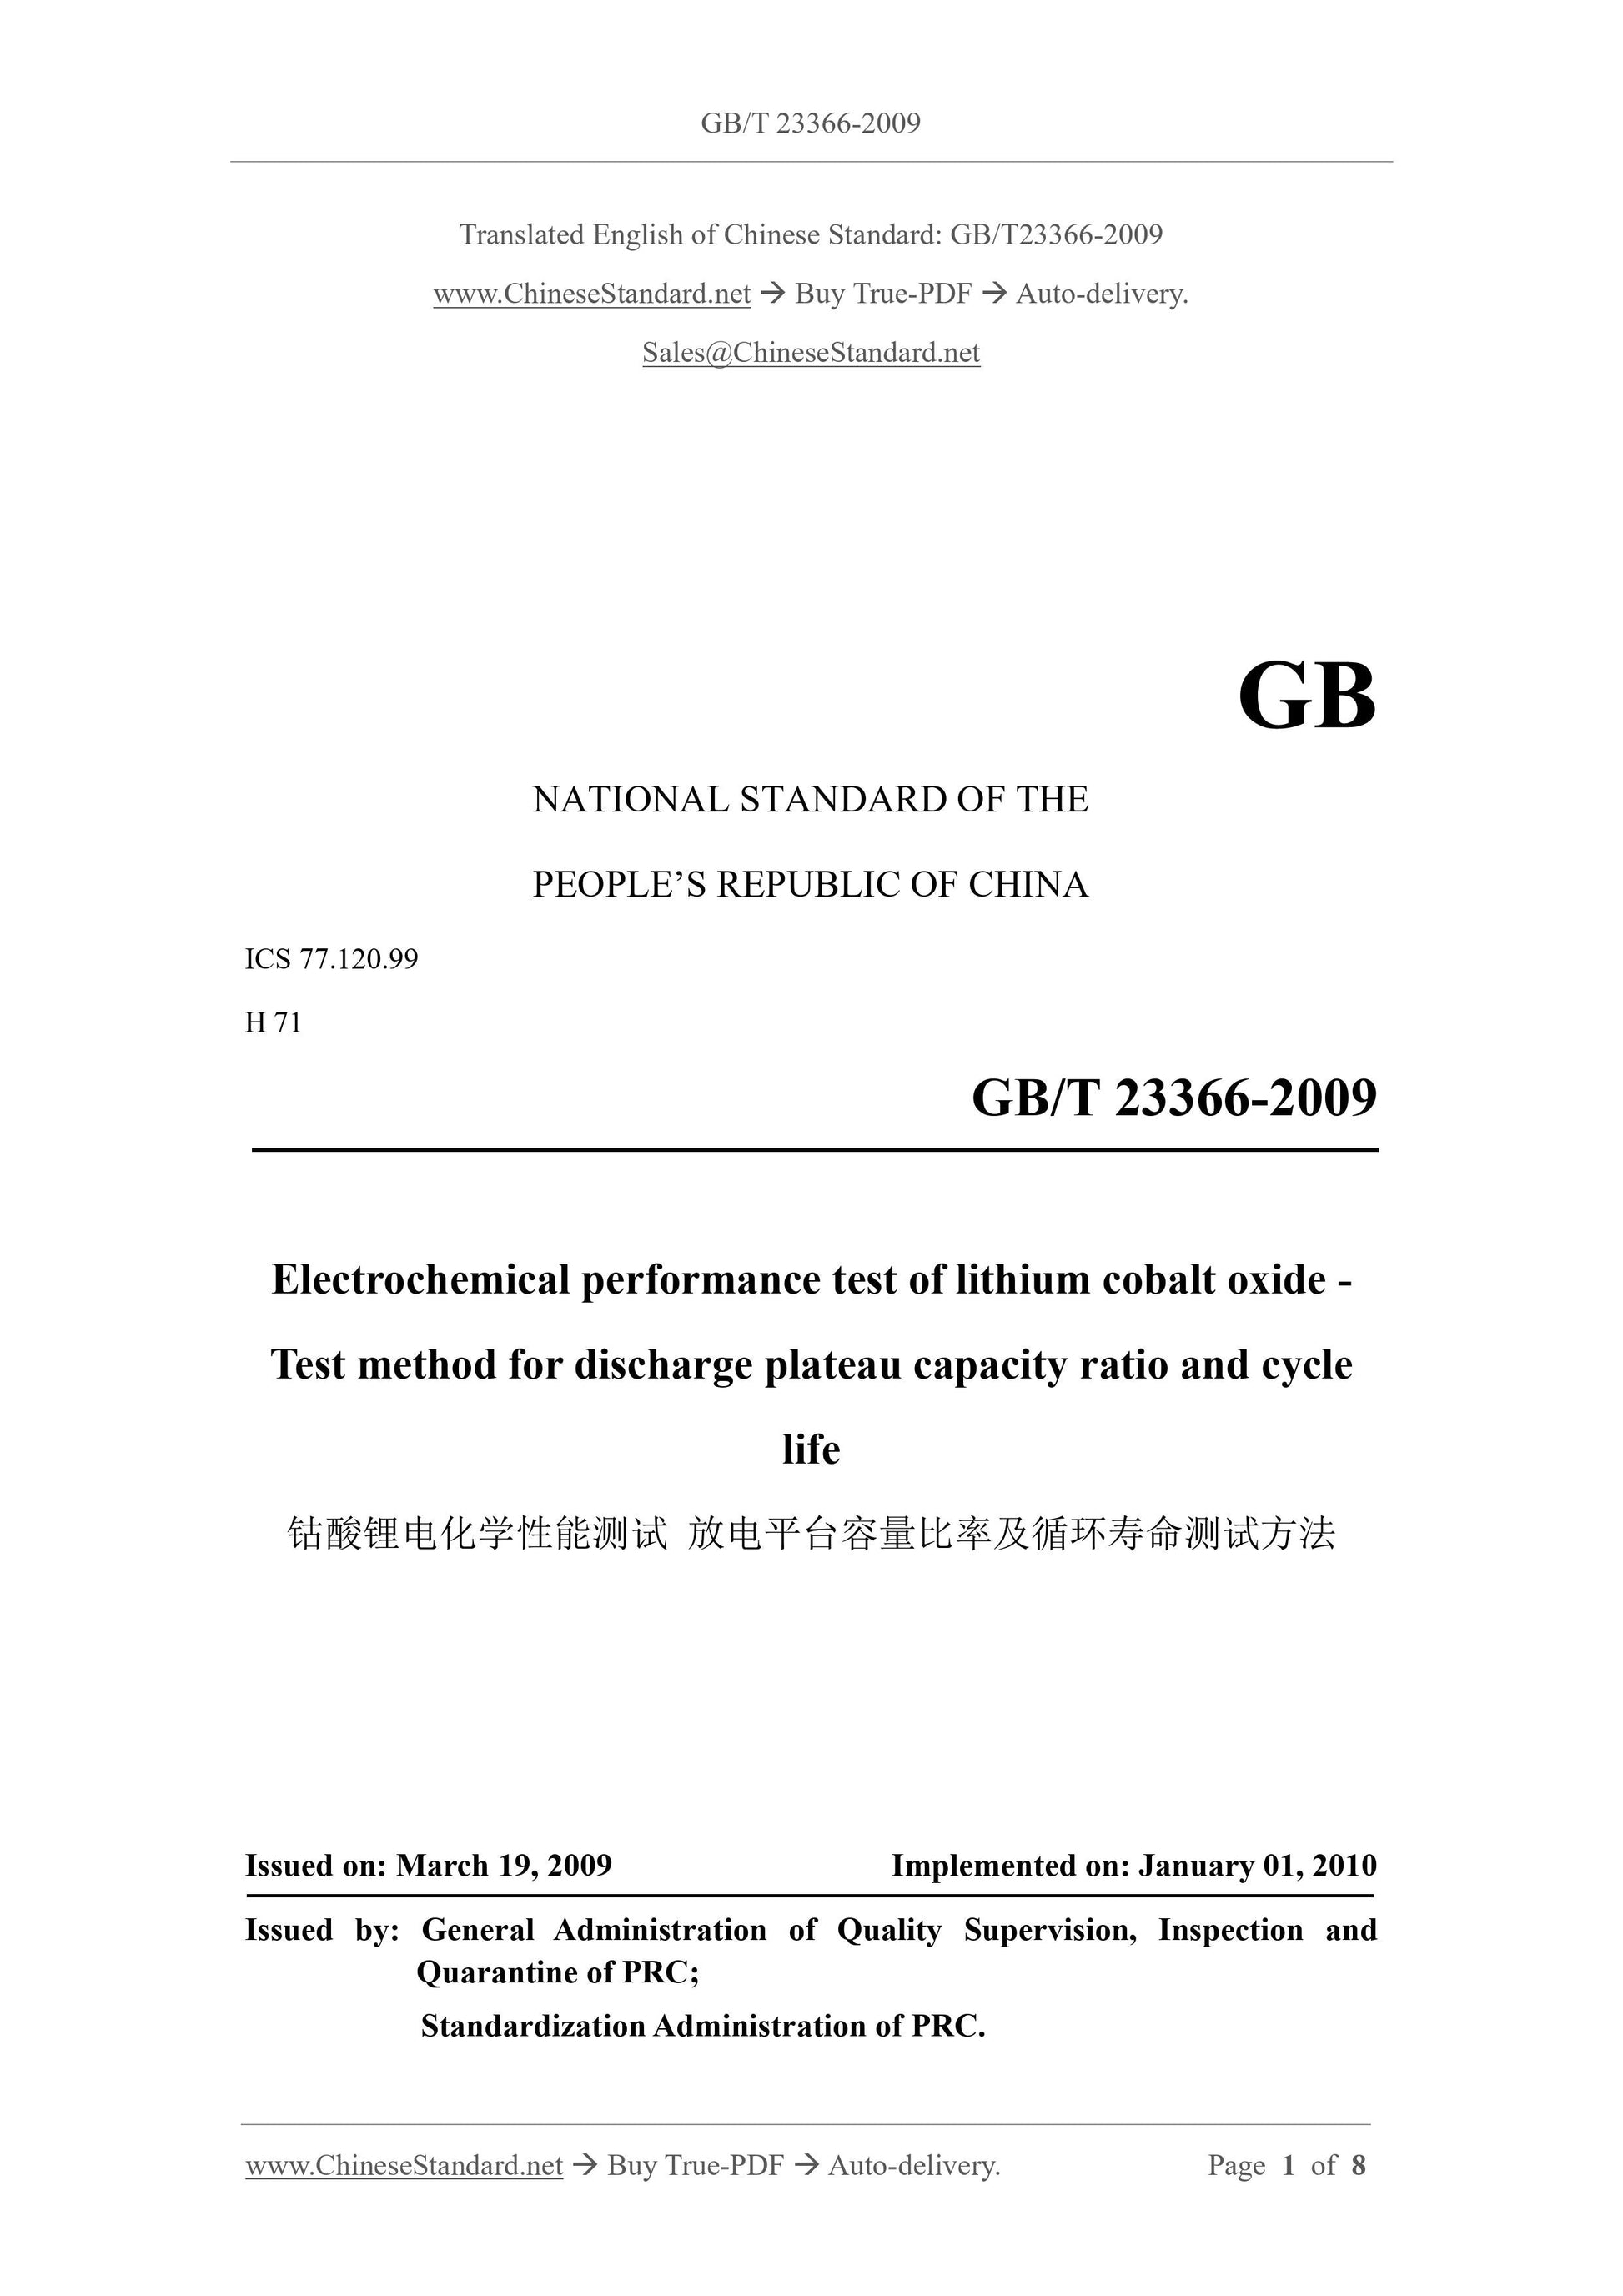 GB/T 23366-2009 Page 1